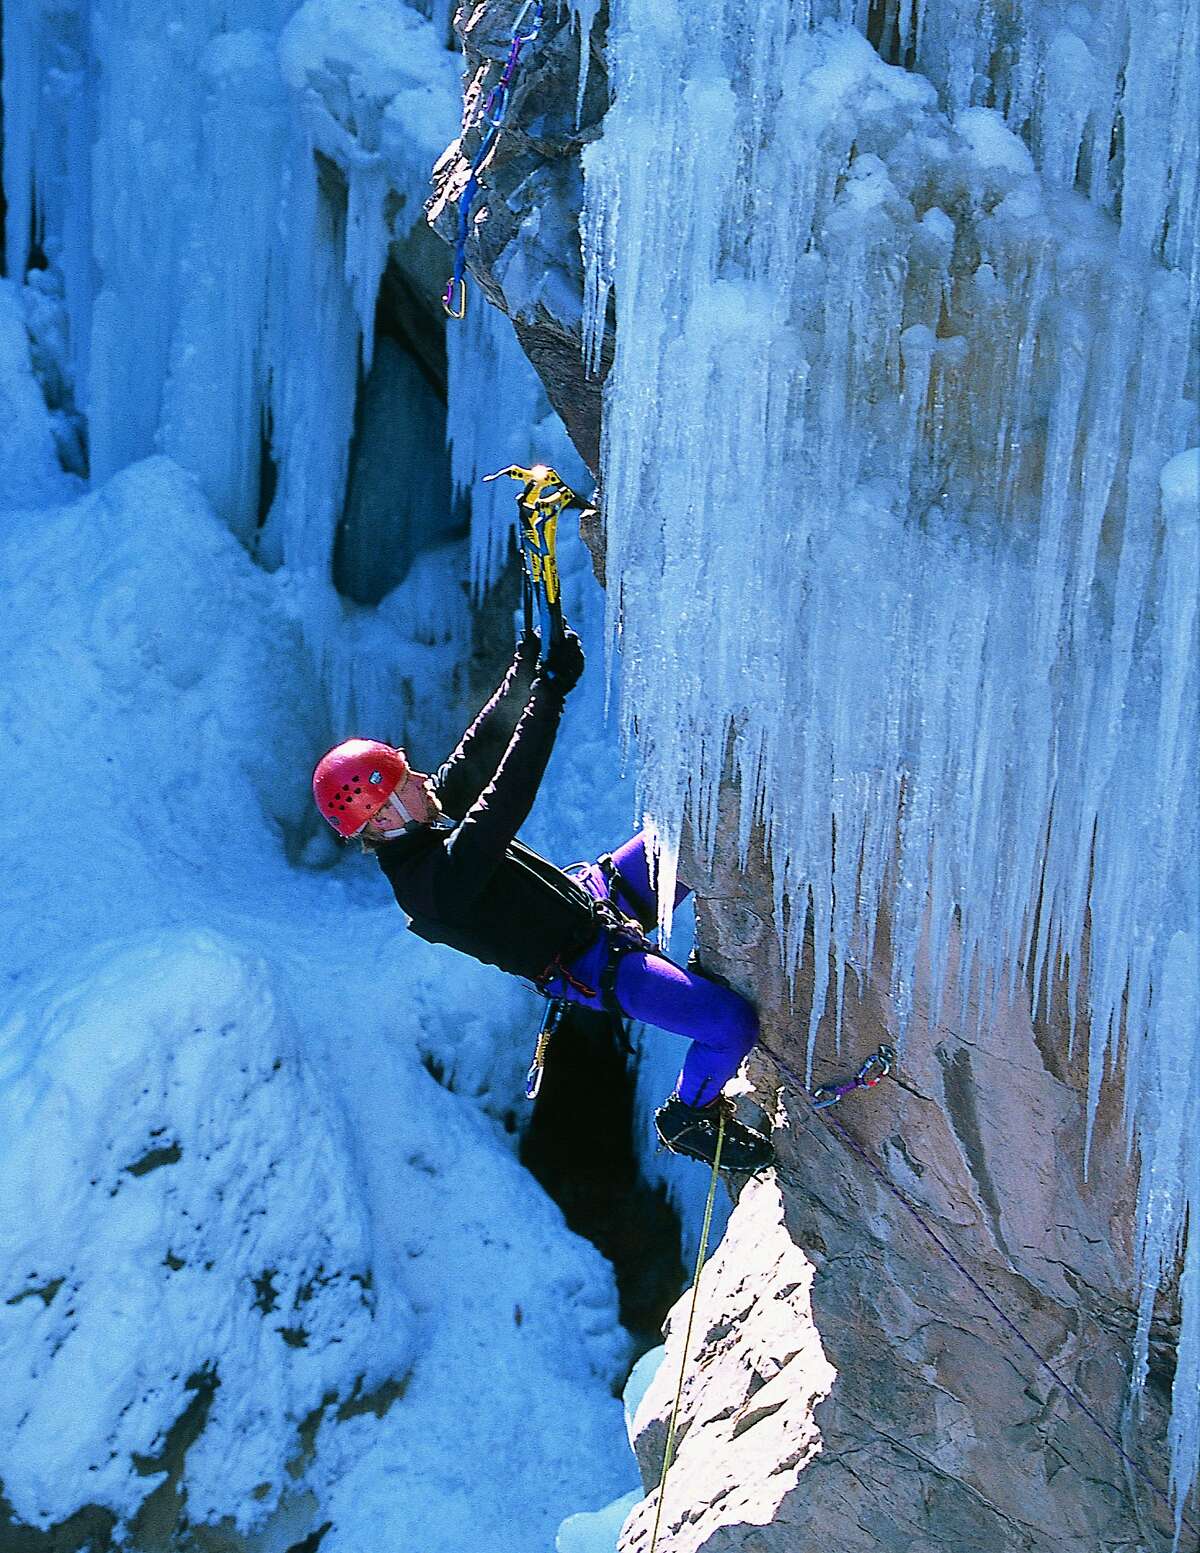 This 1990s photo provided by Adaptable Man LLC and JeffLoweClimber.com shows climber Jeff Lowe tackling an icy wall in Ouray, Colo., on a route he named Dizzy With A Vision. Lowe, an elite climber and inventor of products and techniques, died Friday, Aug. 24, 2018 at a care facility in Fort Collins, Colo. He was 67. (Adaptable Man LLC via AP)